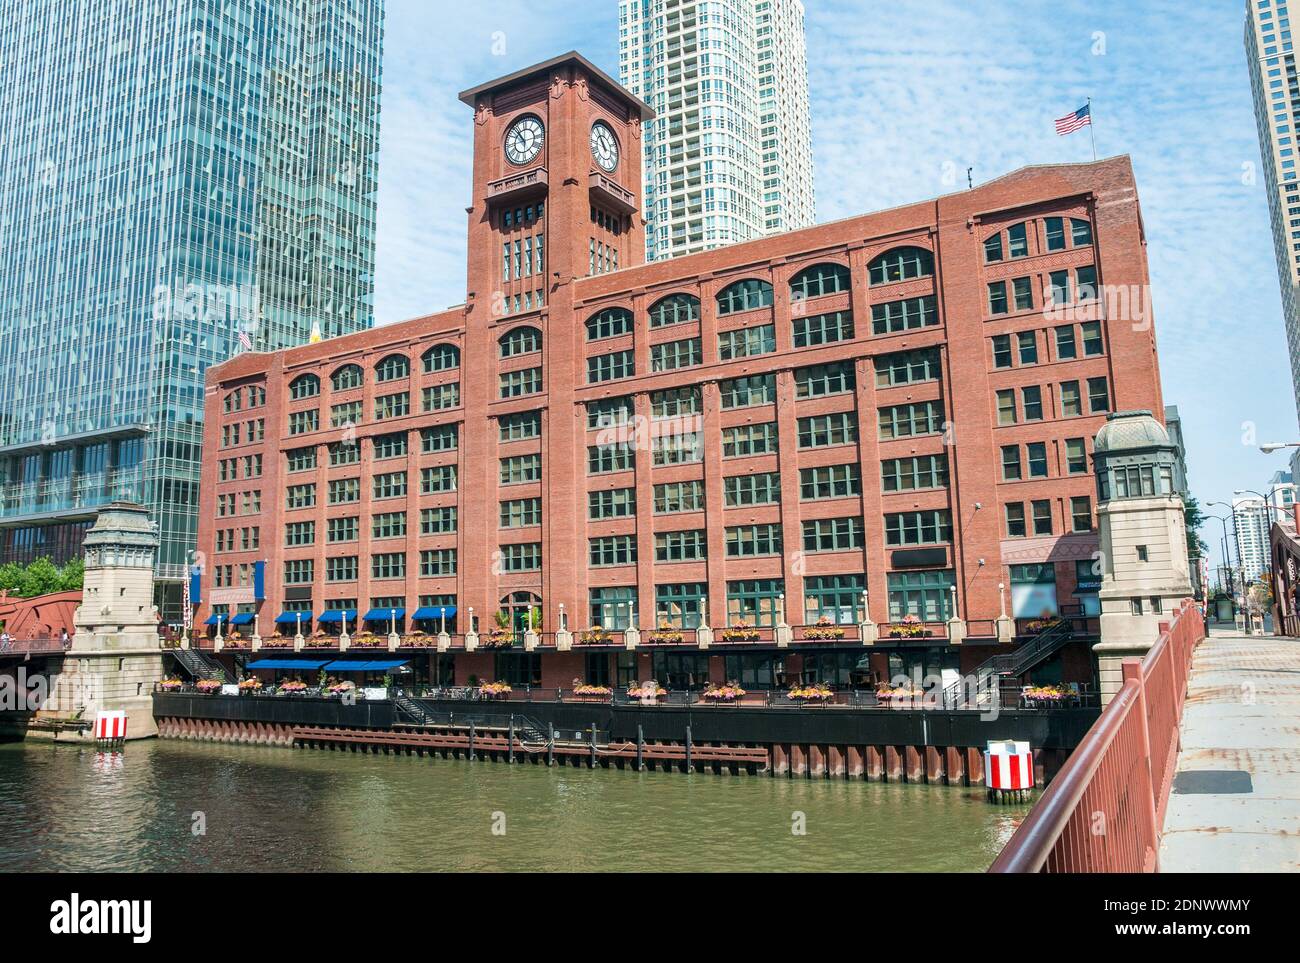 View of Reid Murdoch Building with clock from below by the Chicago river, Illinois, USA Stock Photo